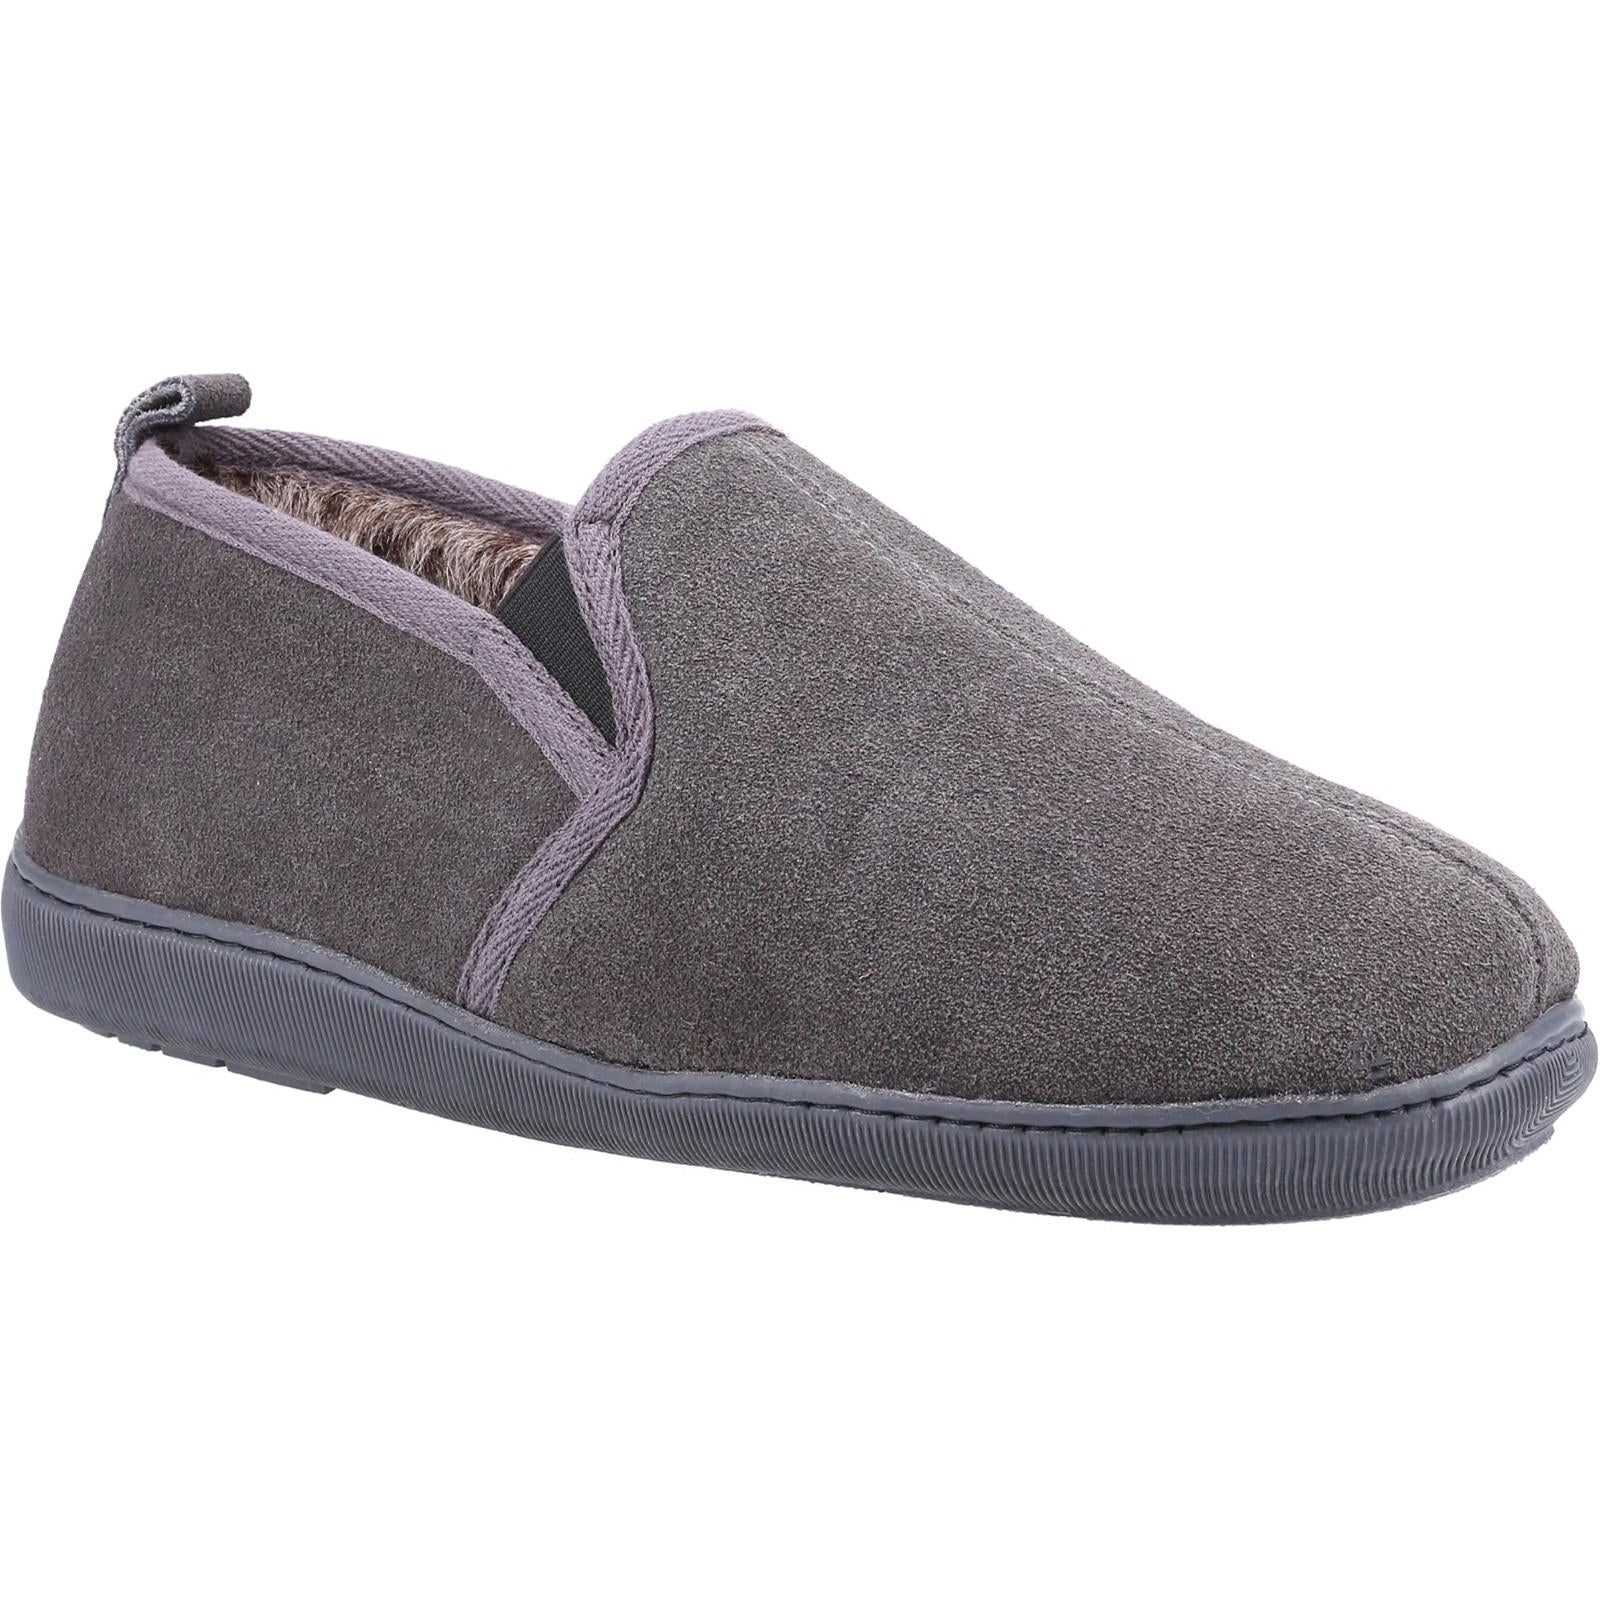 Hush Puppies Arnold grey suede memory foam fur lined cosy slip on slippers